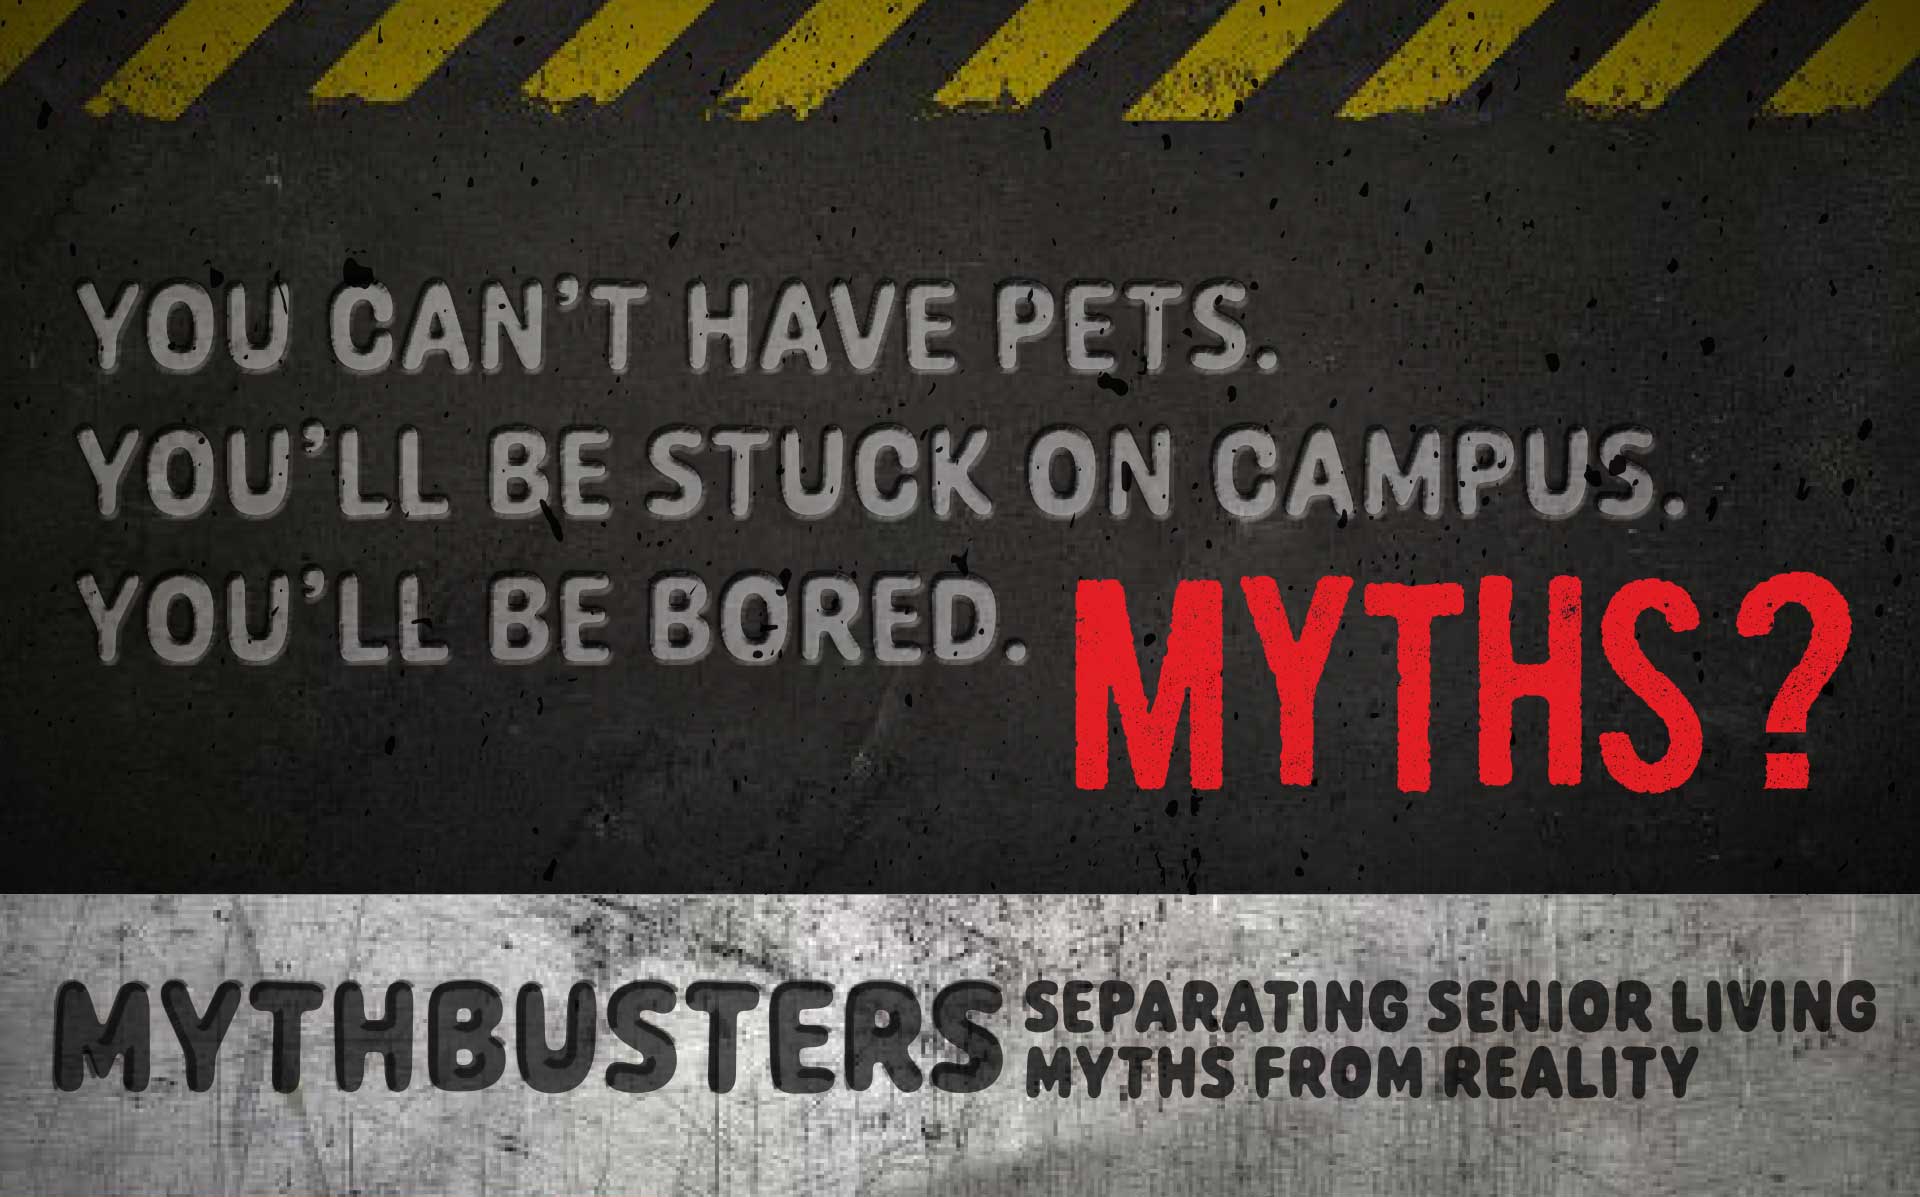 Mythbusters: Separating senior living myths from reality